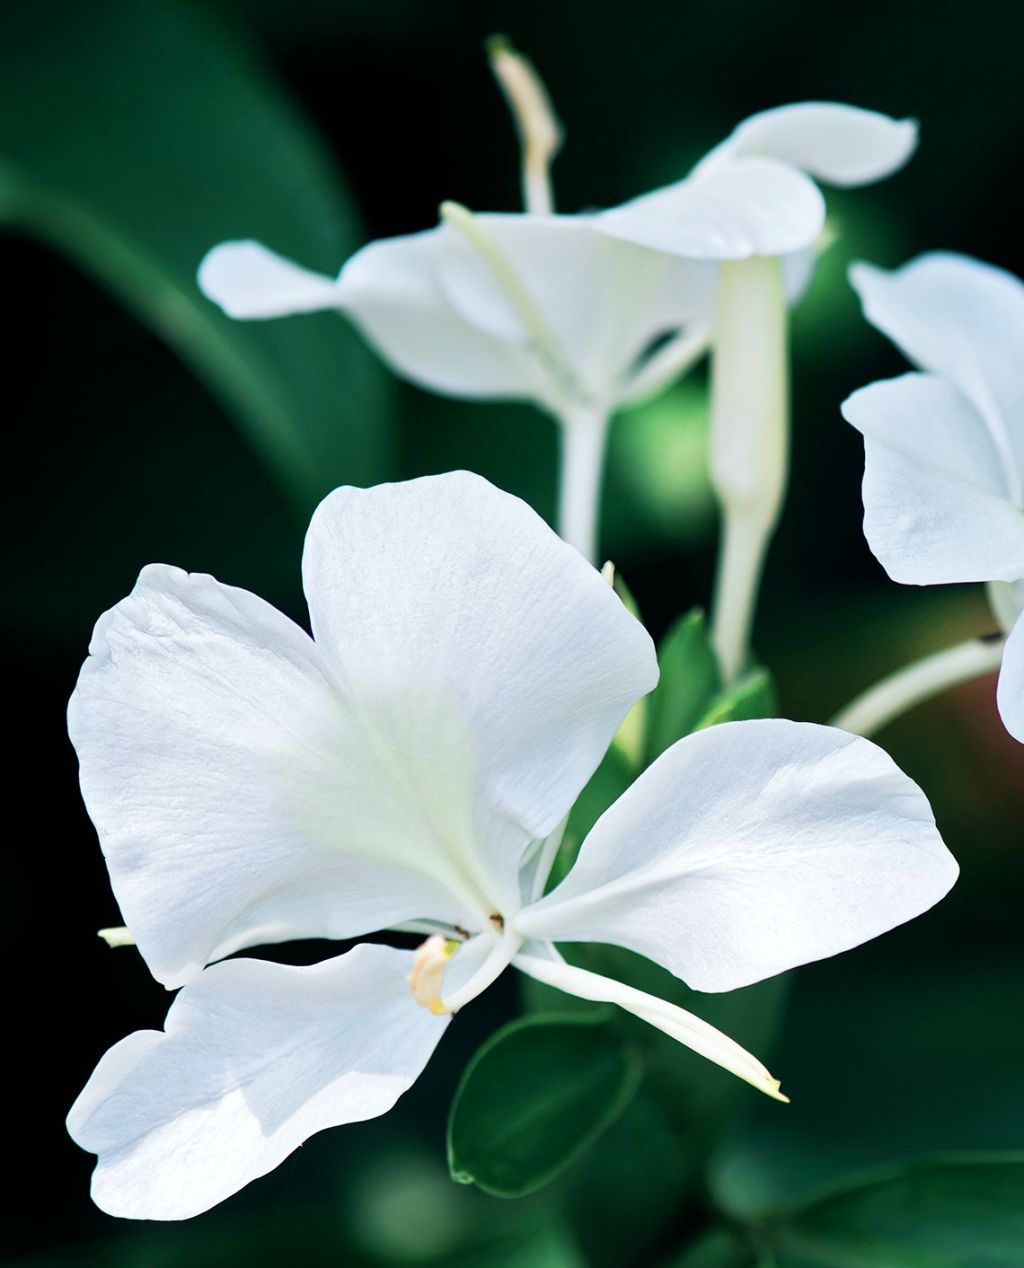 White garland lily flowers